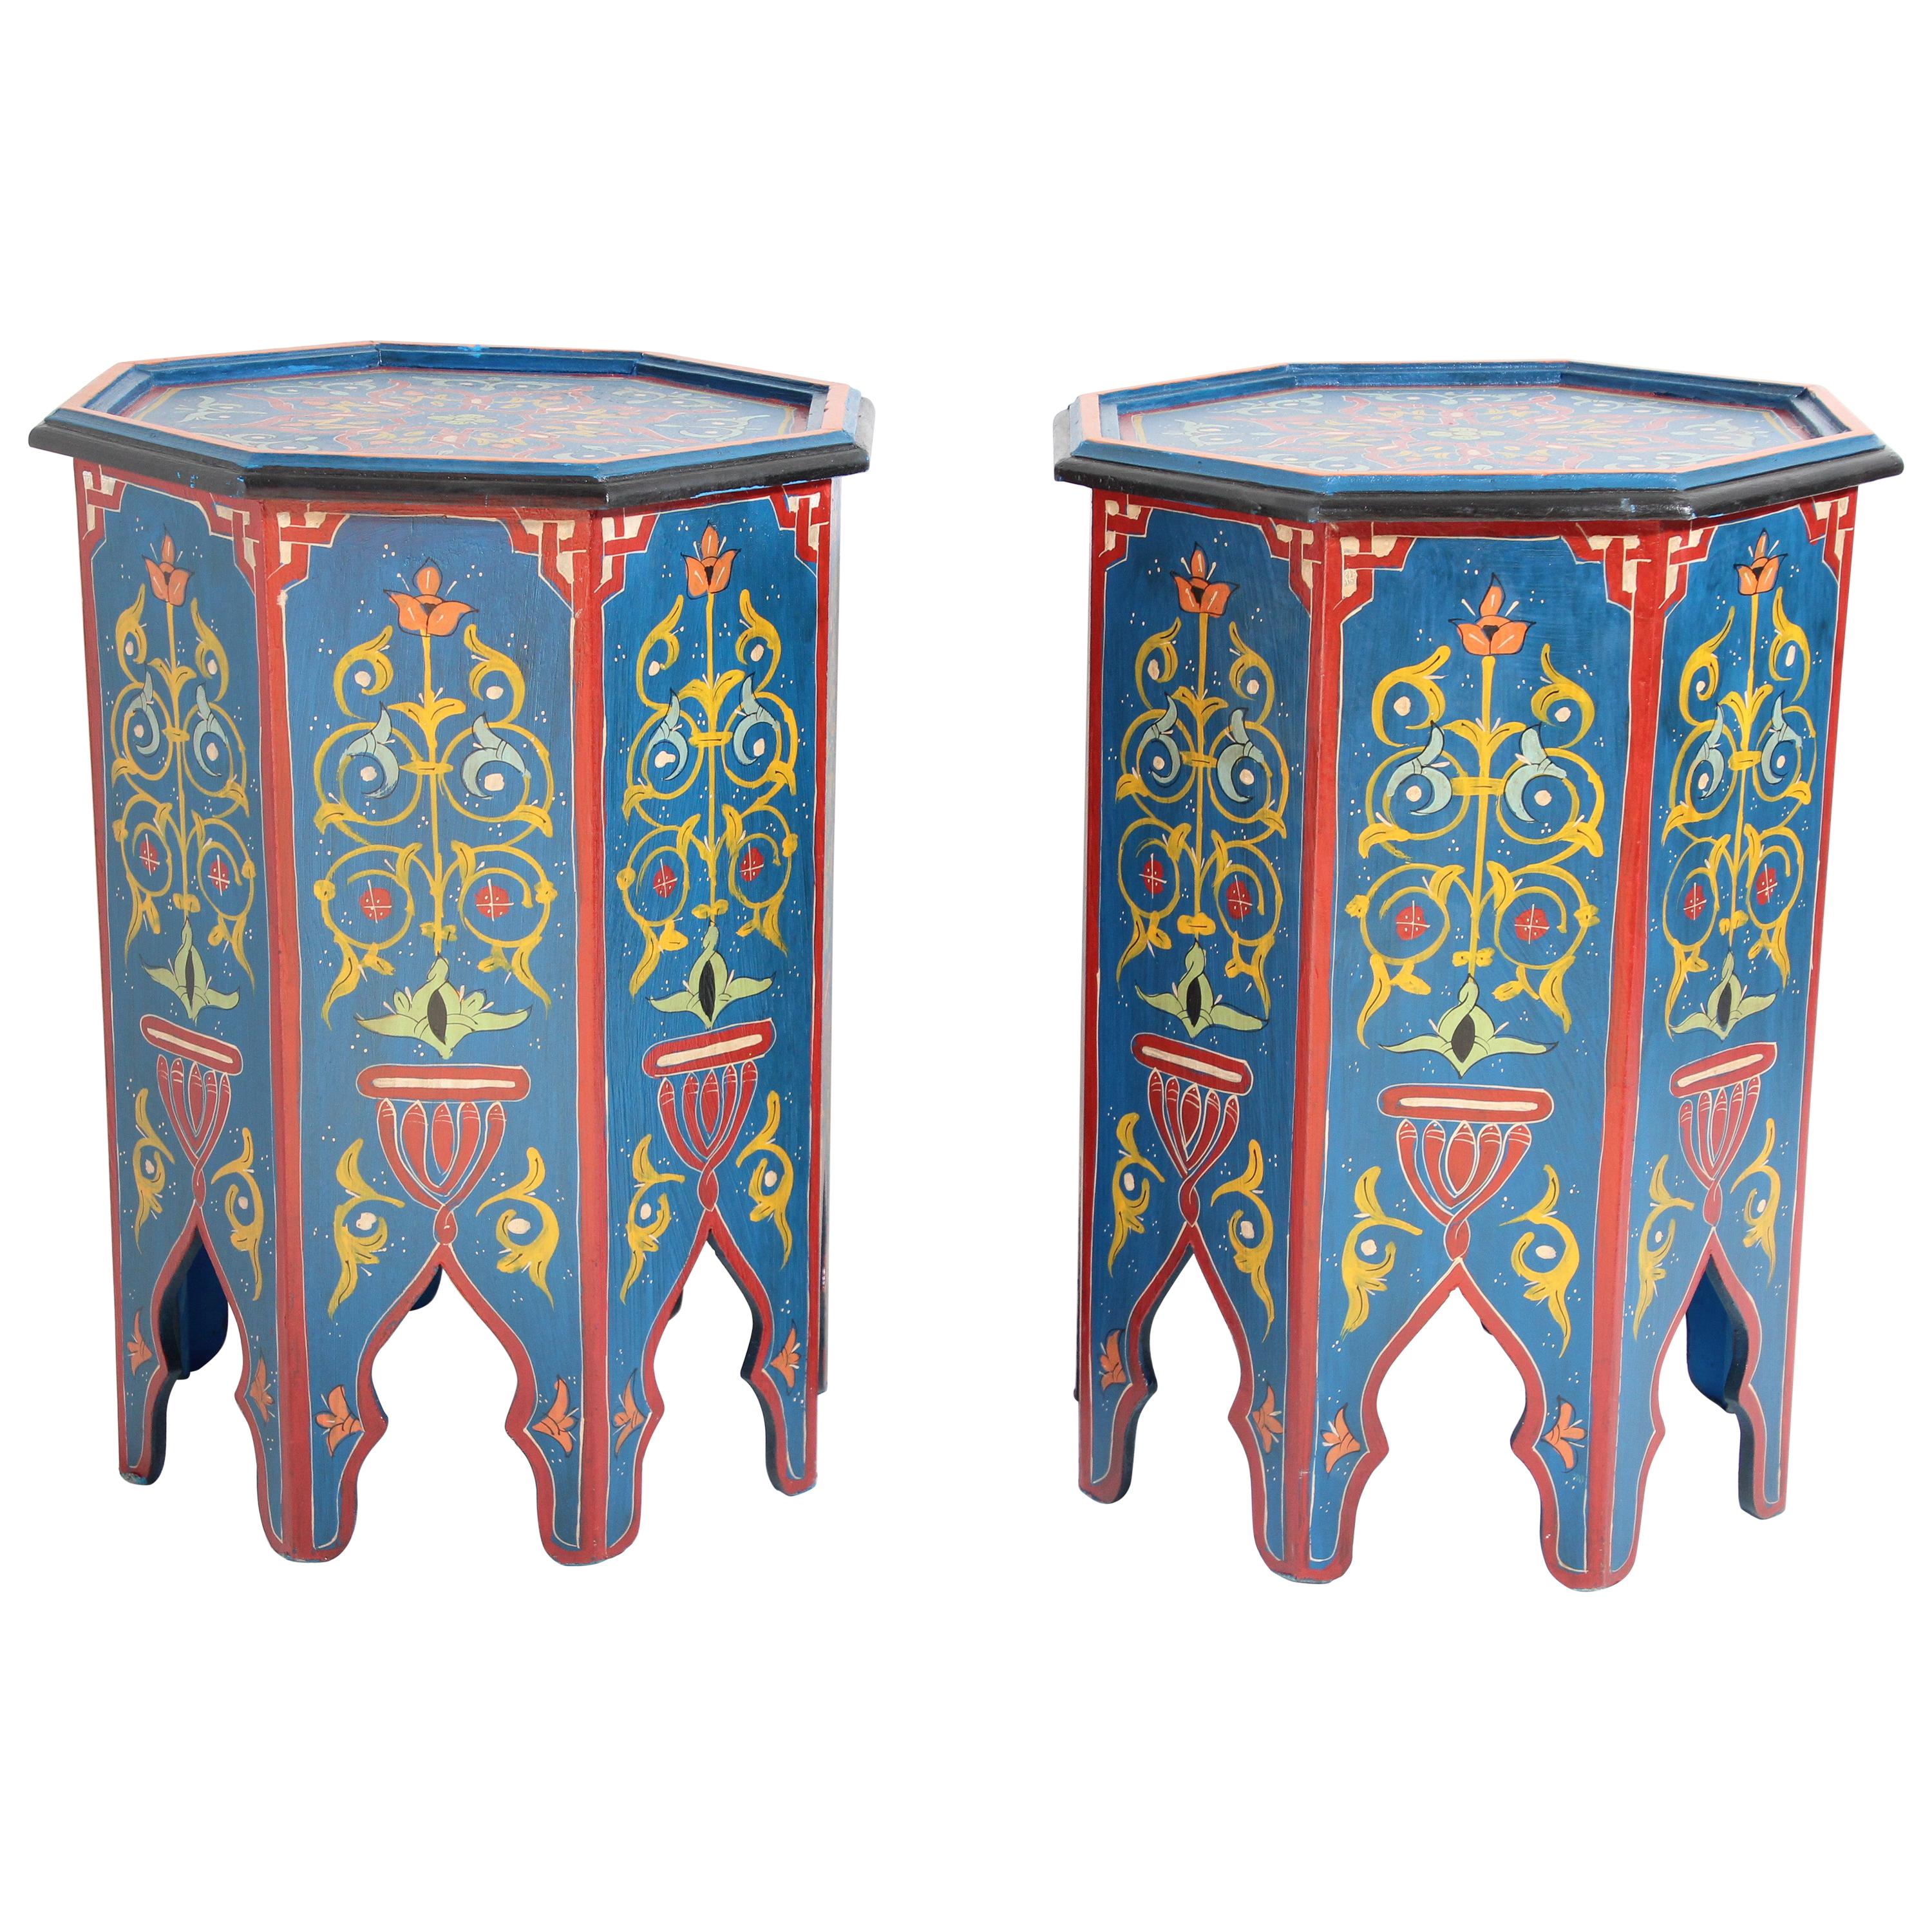 Pair of Hand Painted Blue Moroccan Pedestal Tables